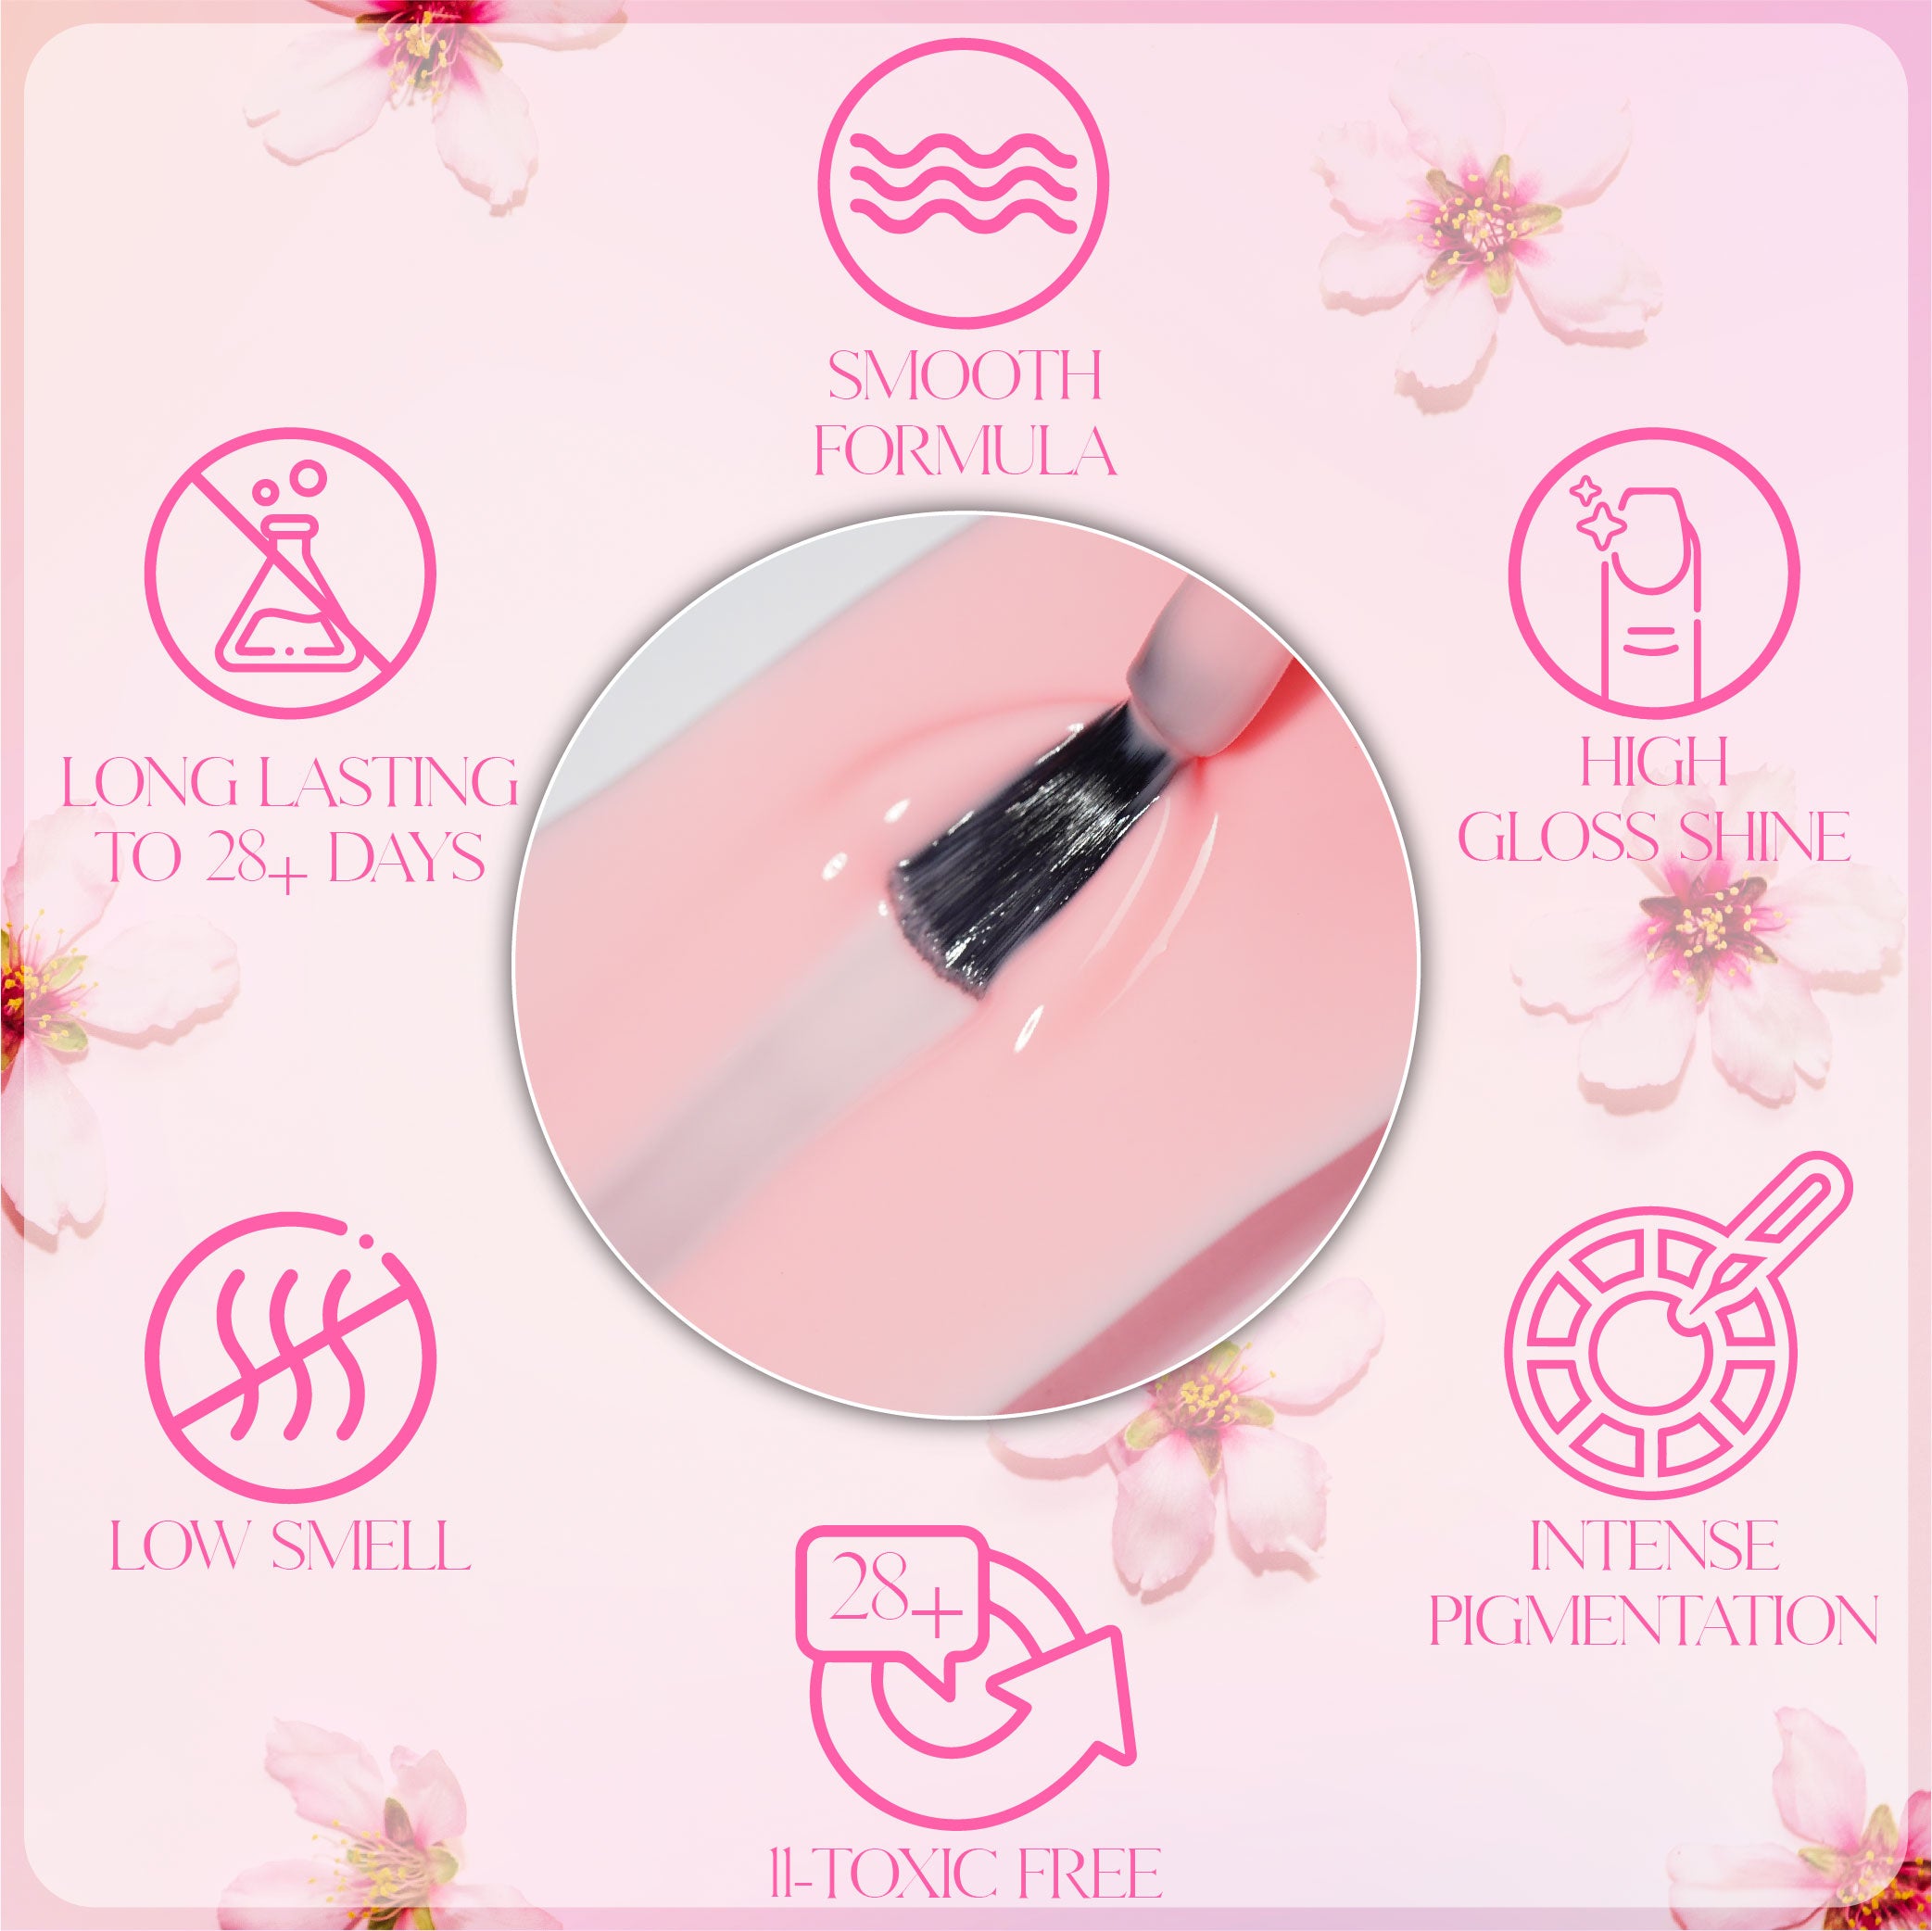 LDS BP - 11 - Blossom Pink Collection